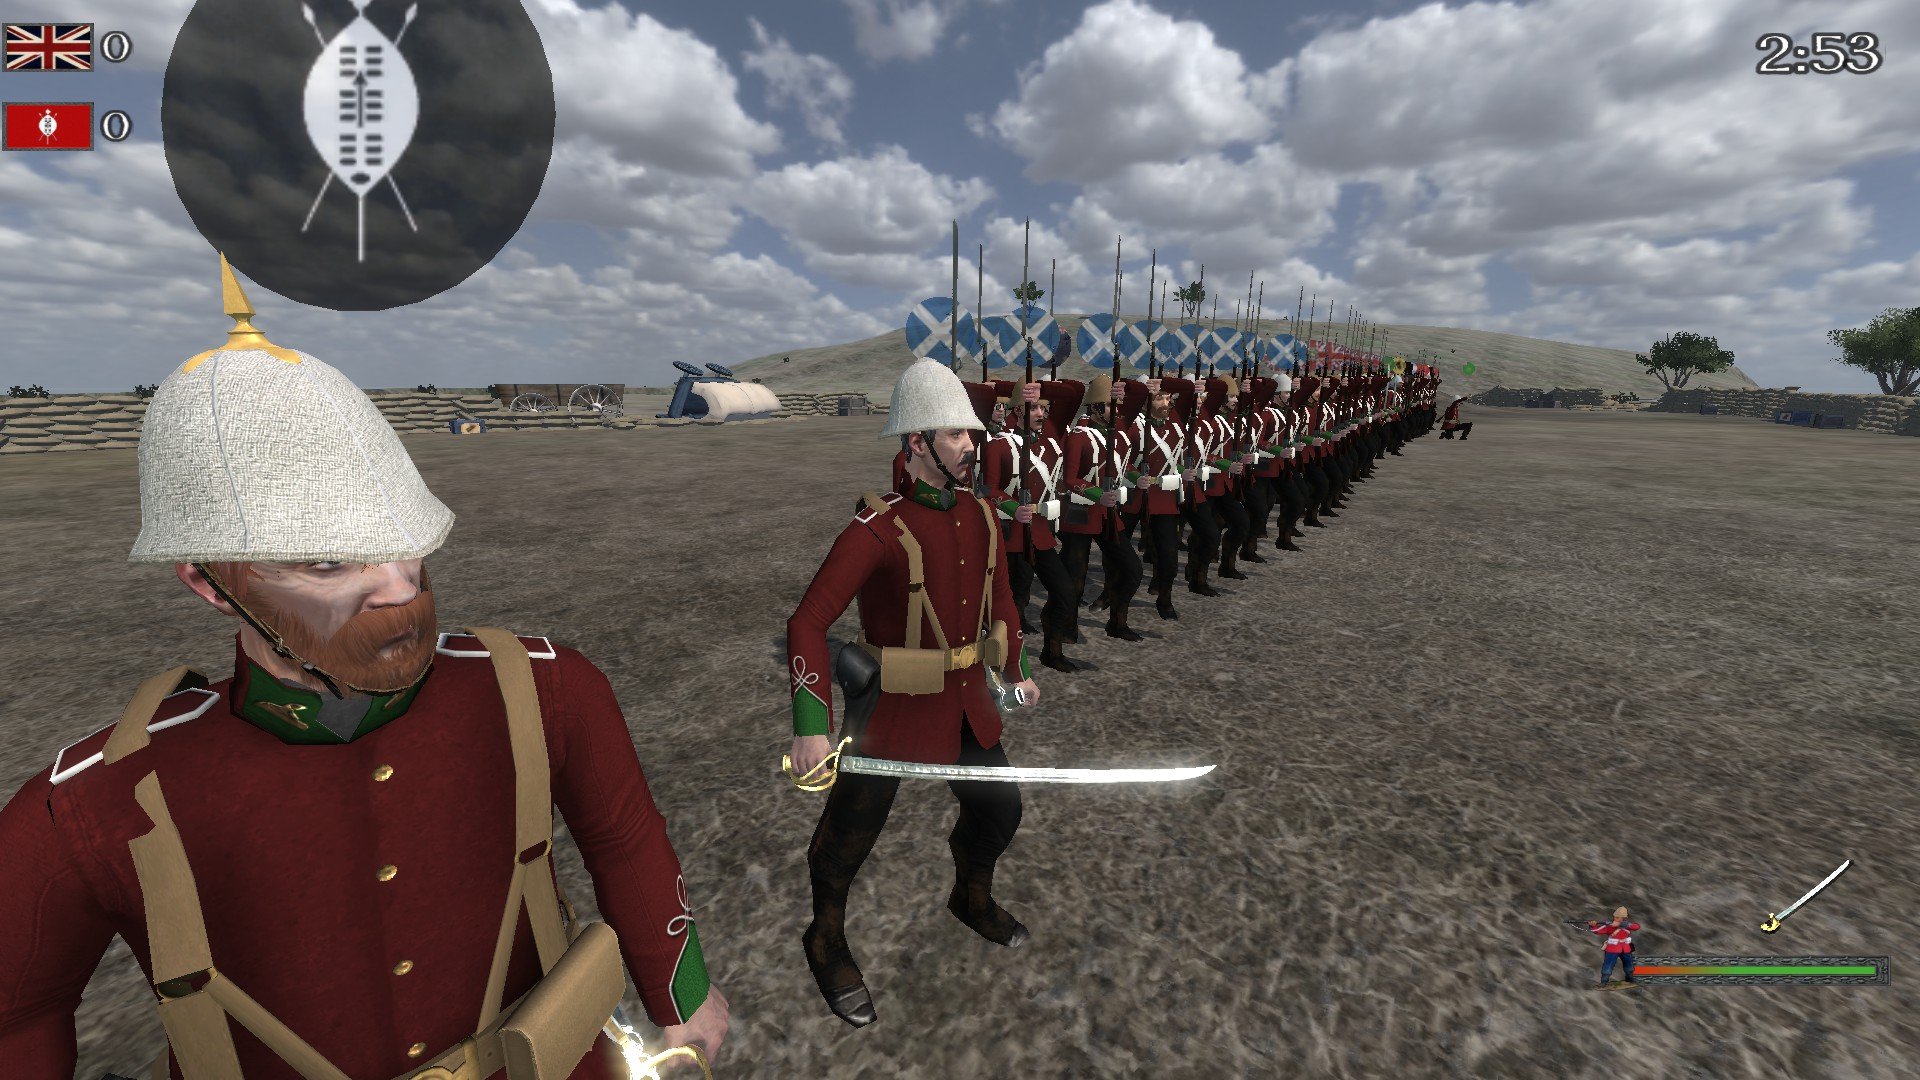 Holding back the zulus at Rorke's Drift